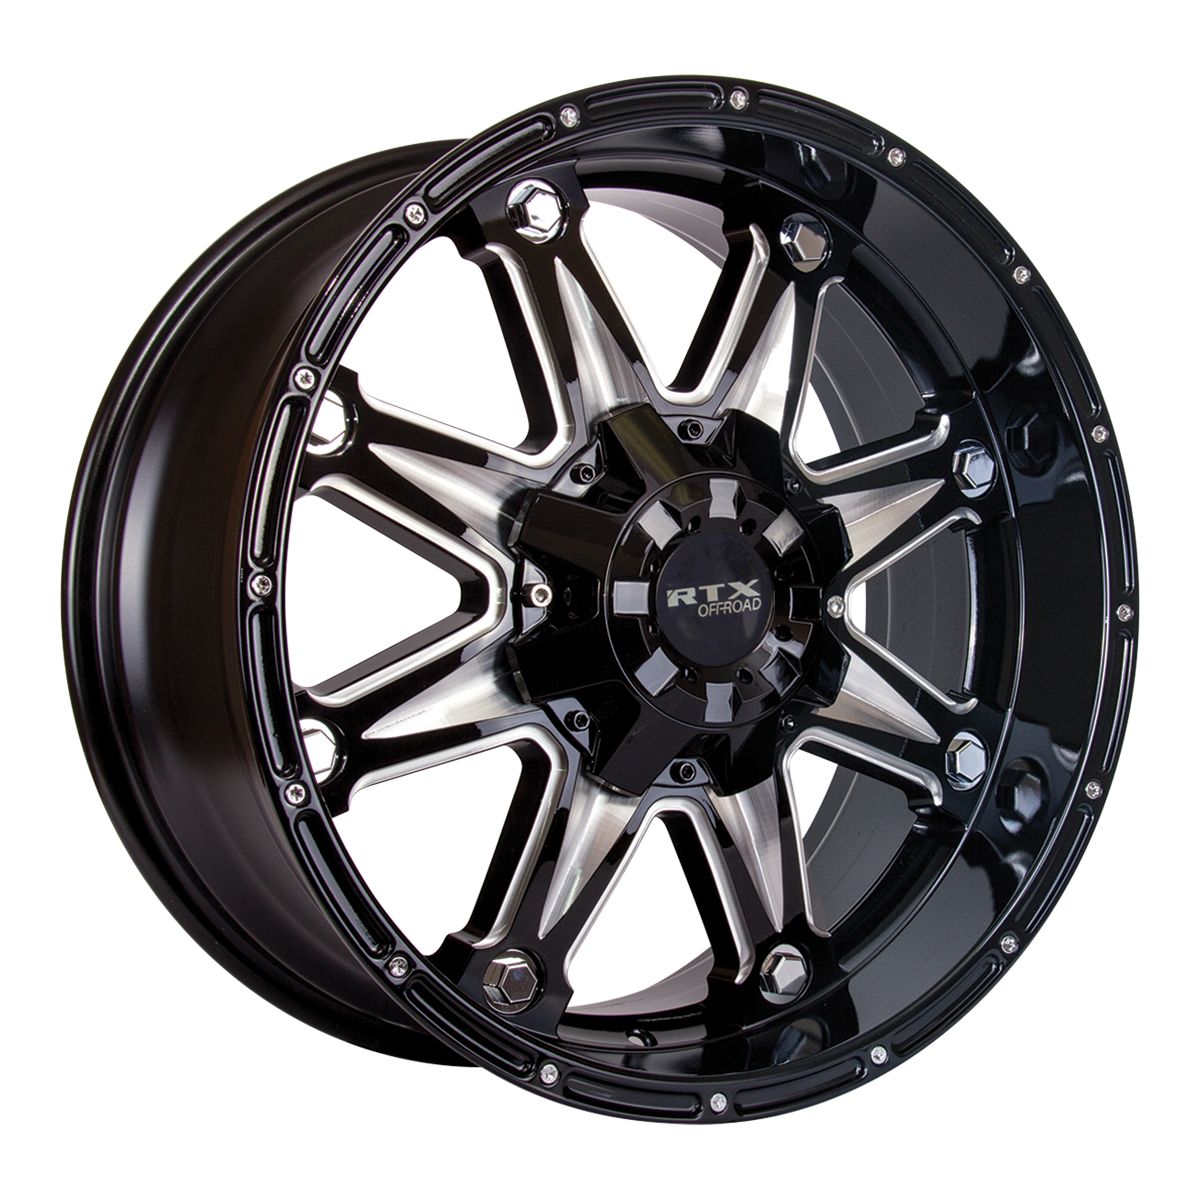 Spine • Black with Milled Spokes • 20x9 8x170 ET15 CB125